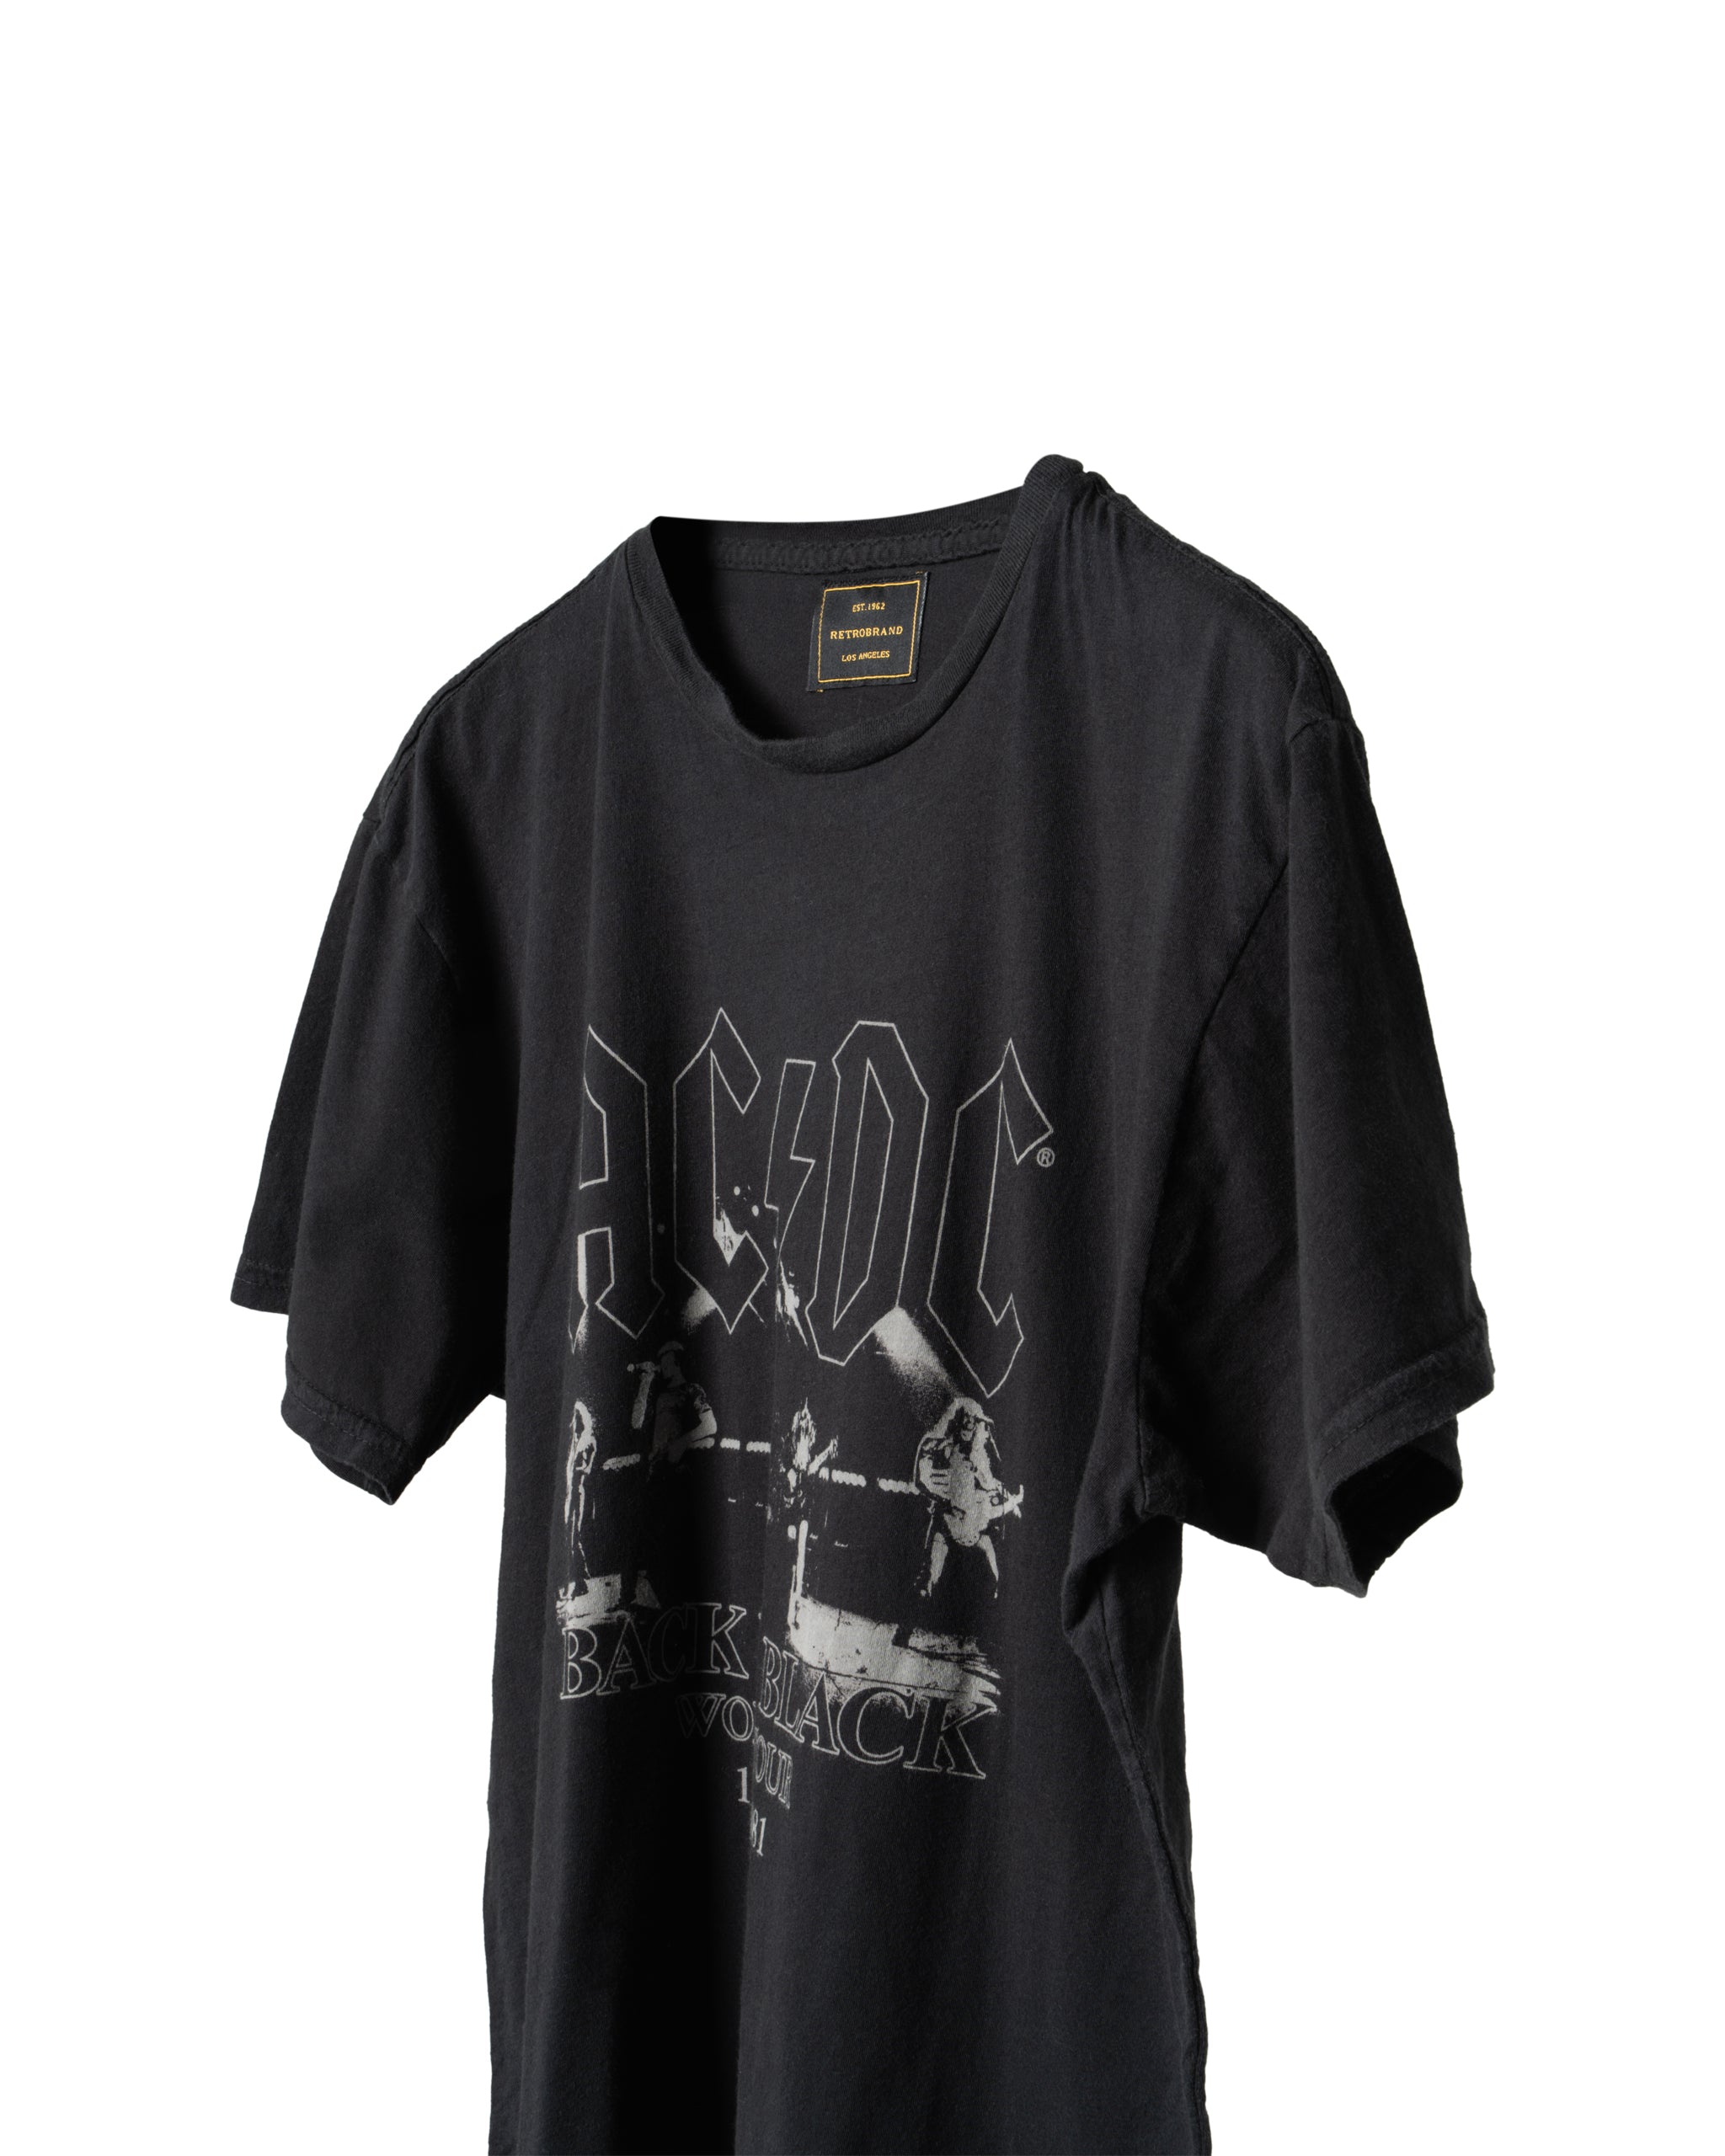 FULL LENGTH US COTTON TEE WITH ACDC PRINT